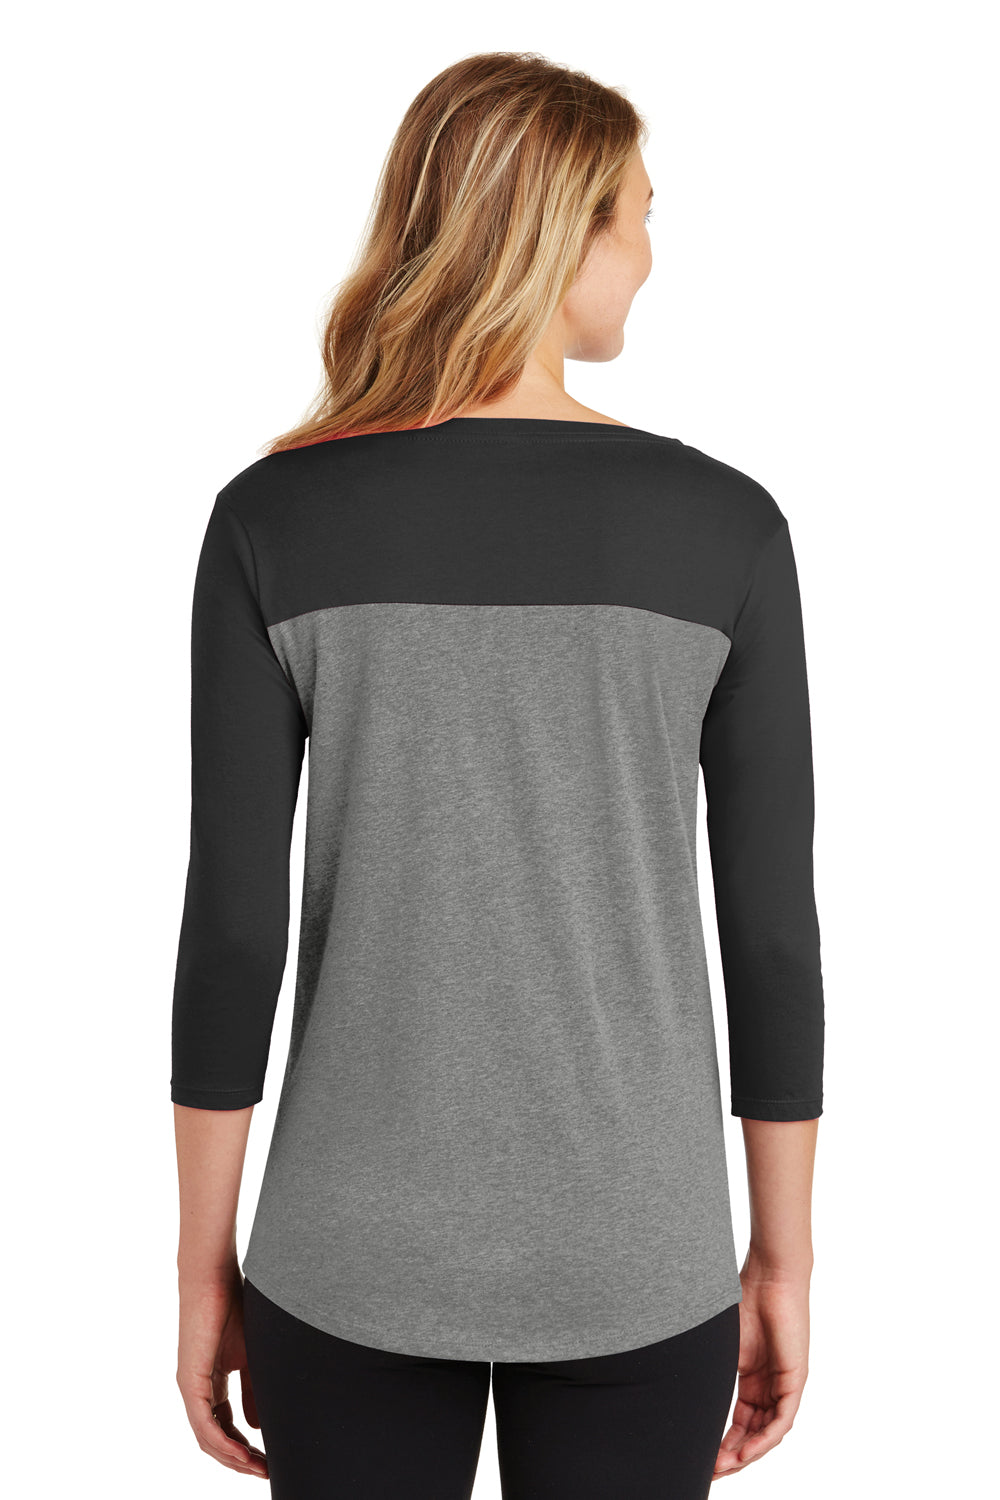 District DT2700 Womens Rally 3/4 Sleeve Wide Neck T-Shirt Heather Grey/Black Back